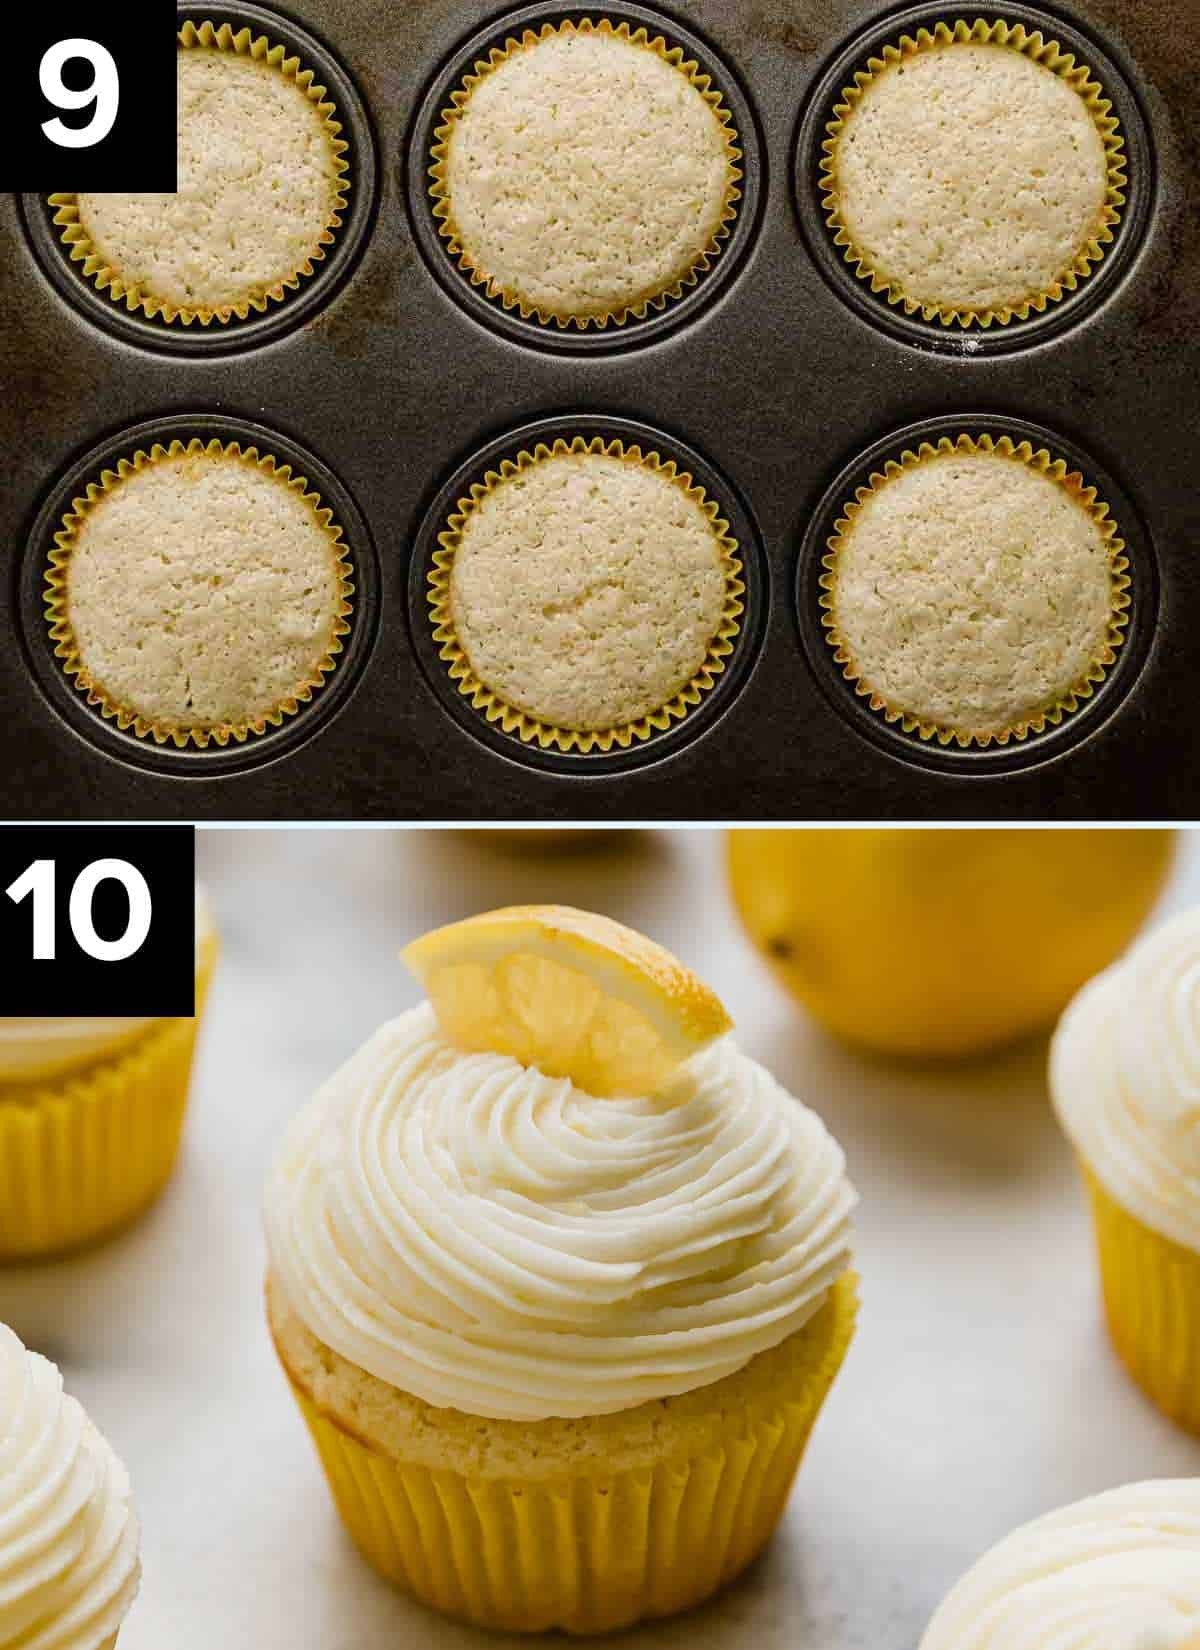 Two images, top photo is baked lemon cupcakes in a cupcake pan. Bottom image is Lemon Cupcakes frosted with lemon frosting.